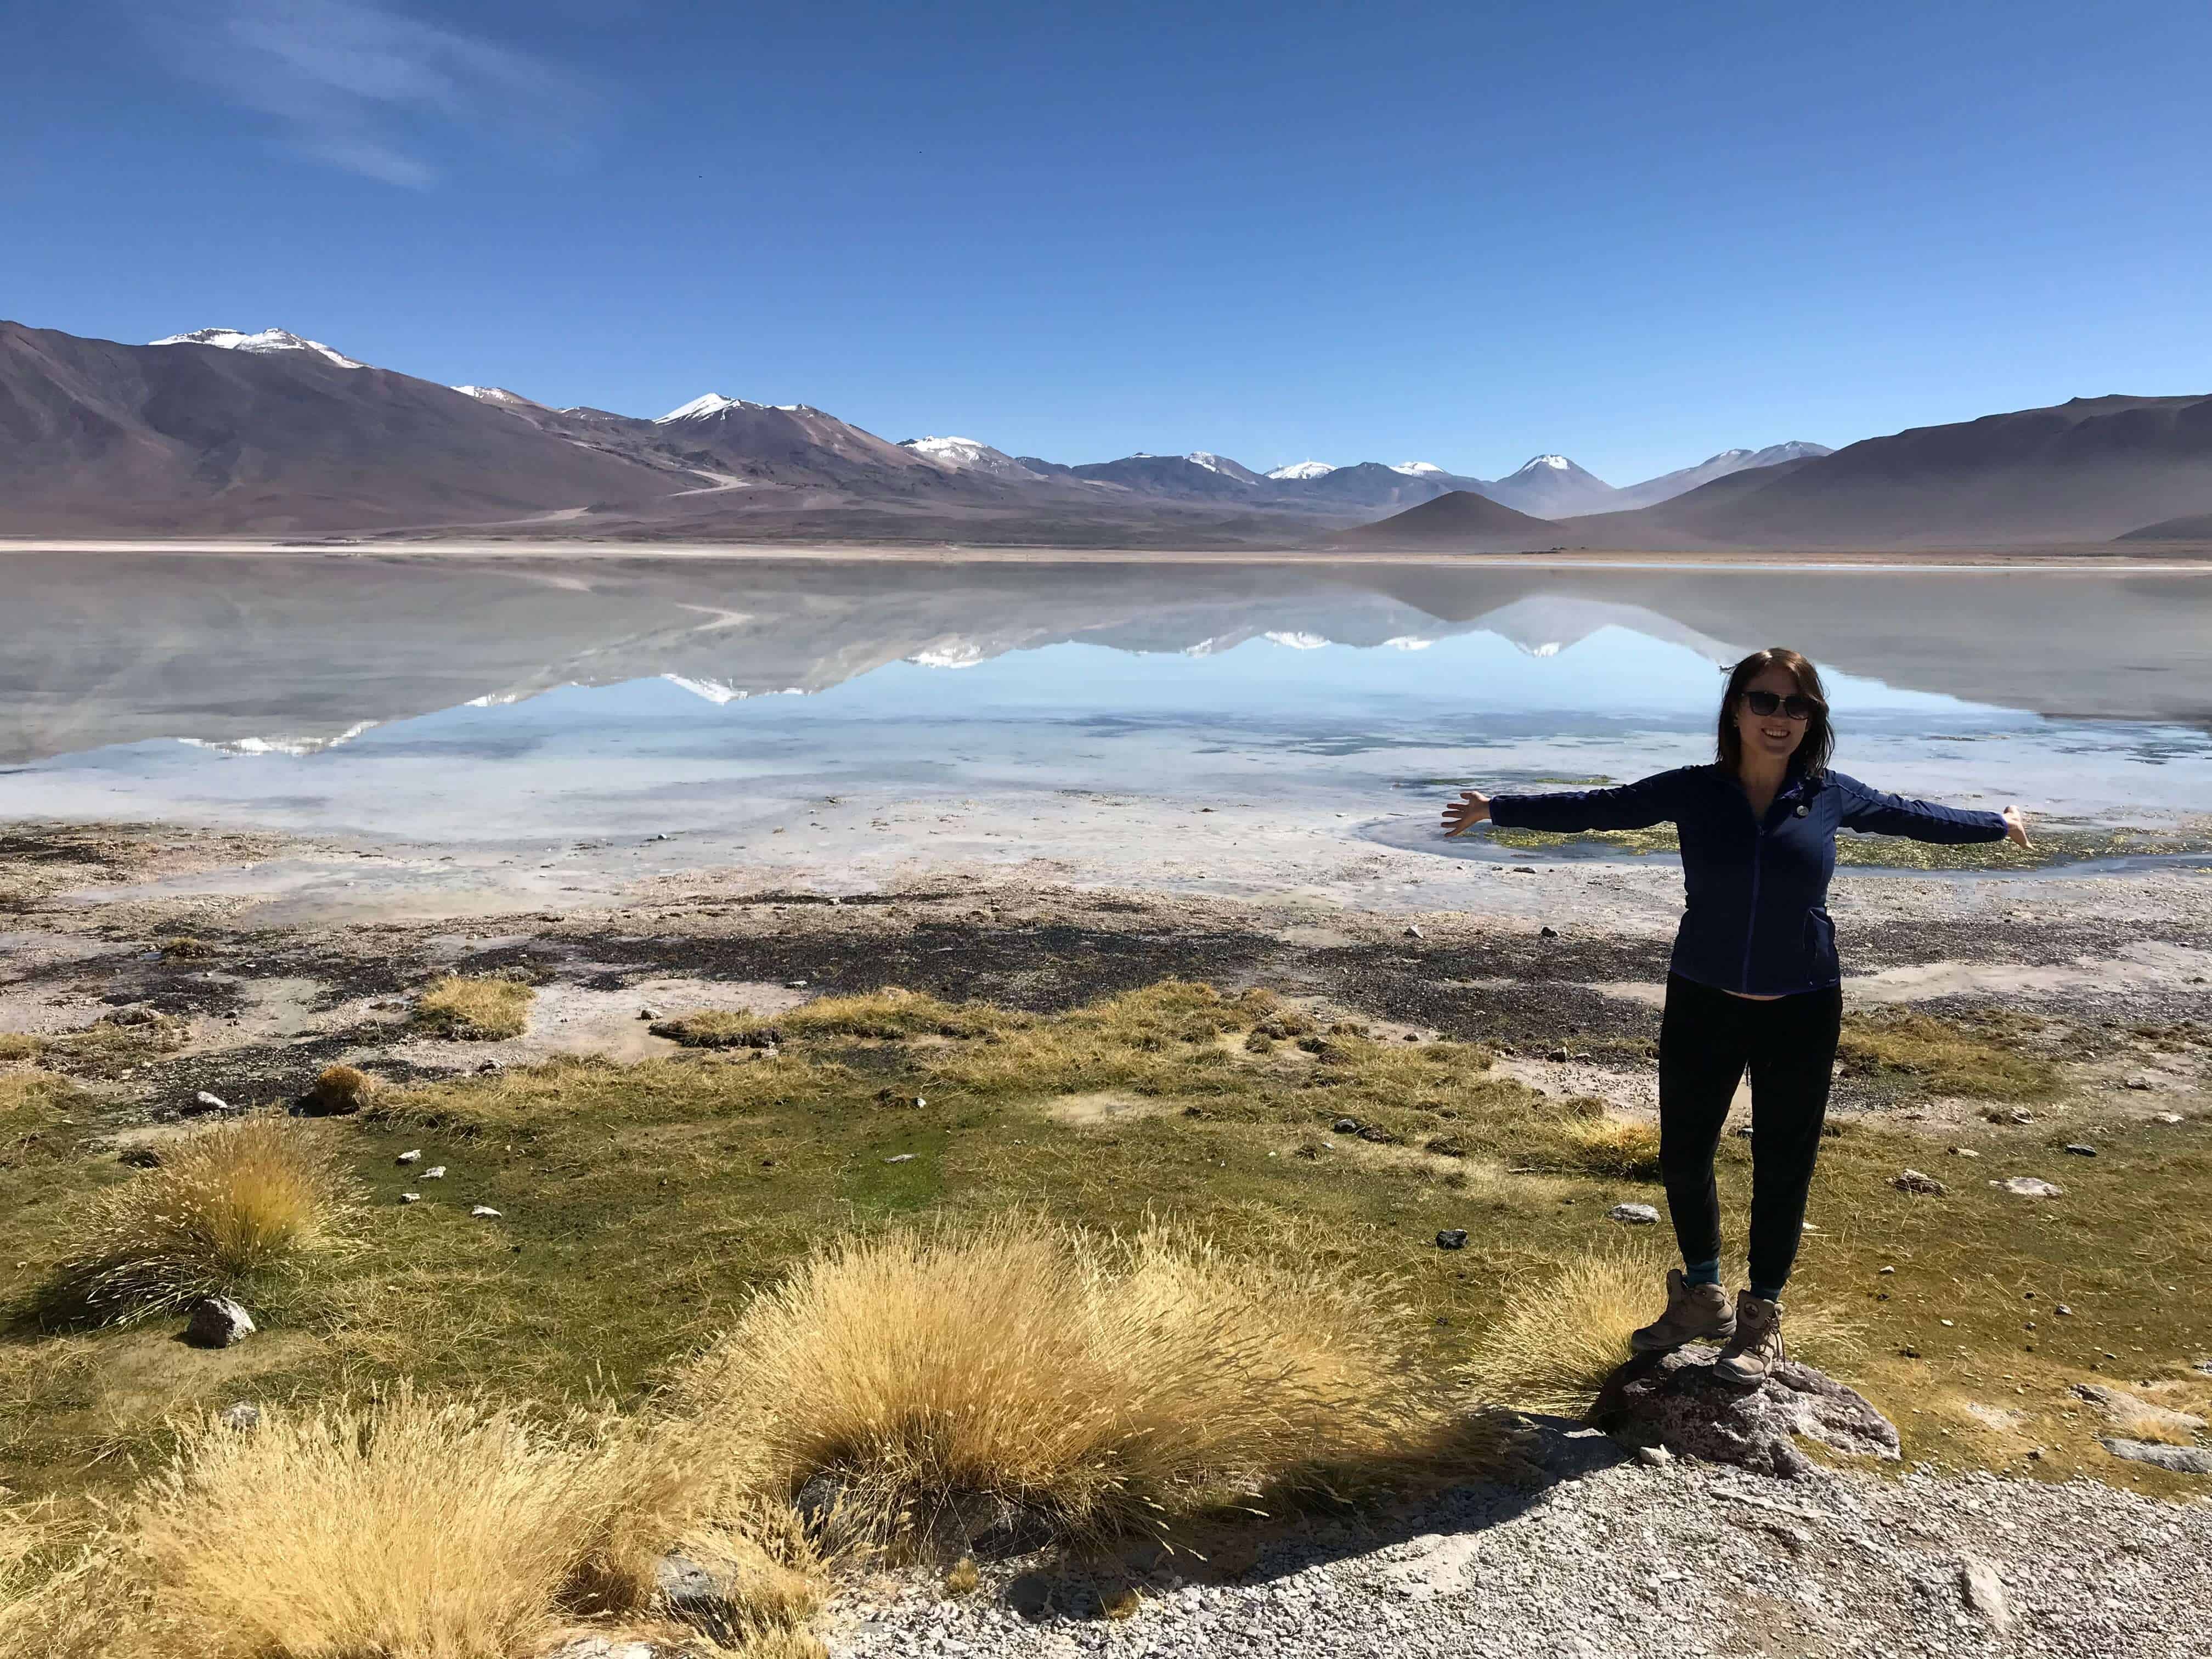 lora standing in front of Reflecting mountains and lakes in Bolivia